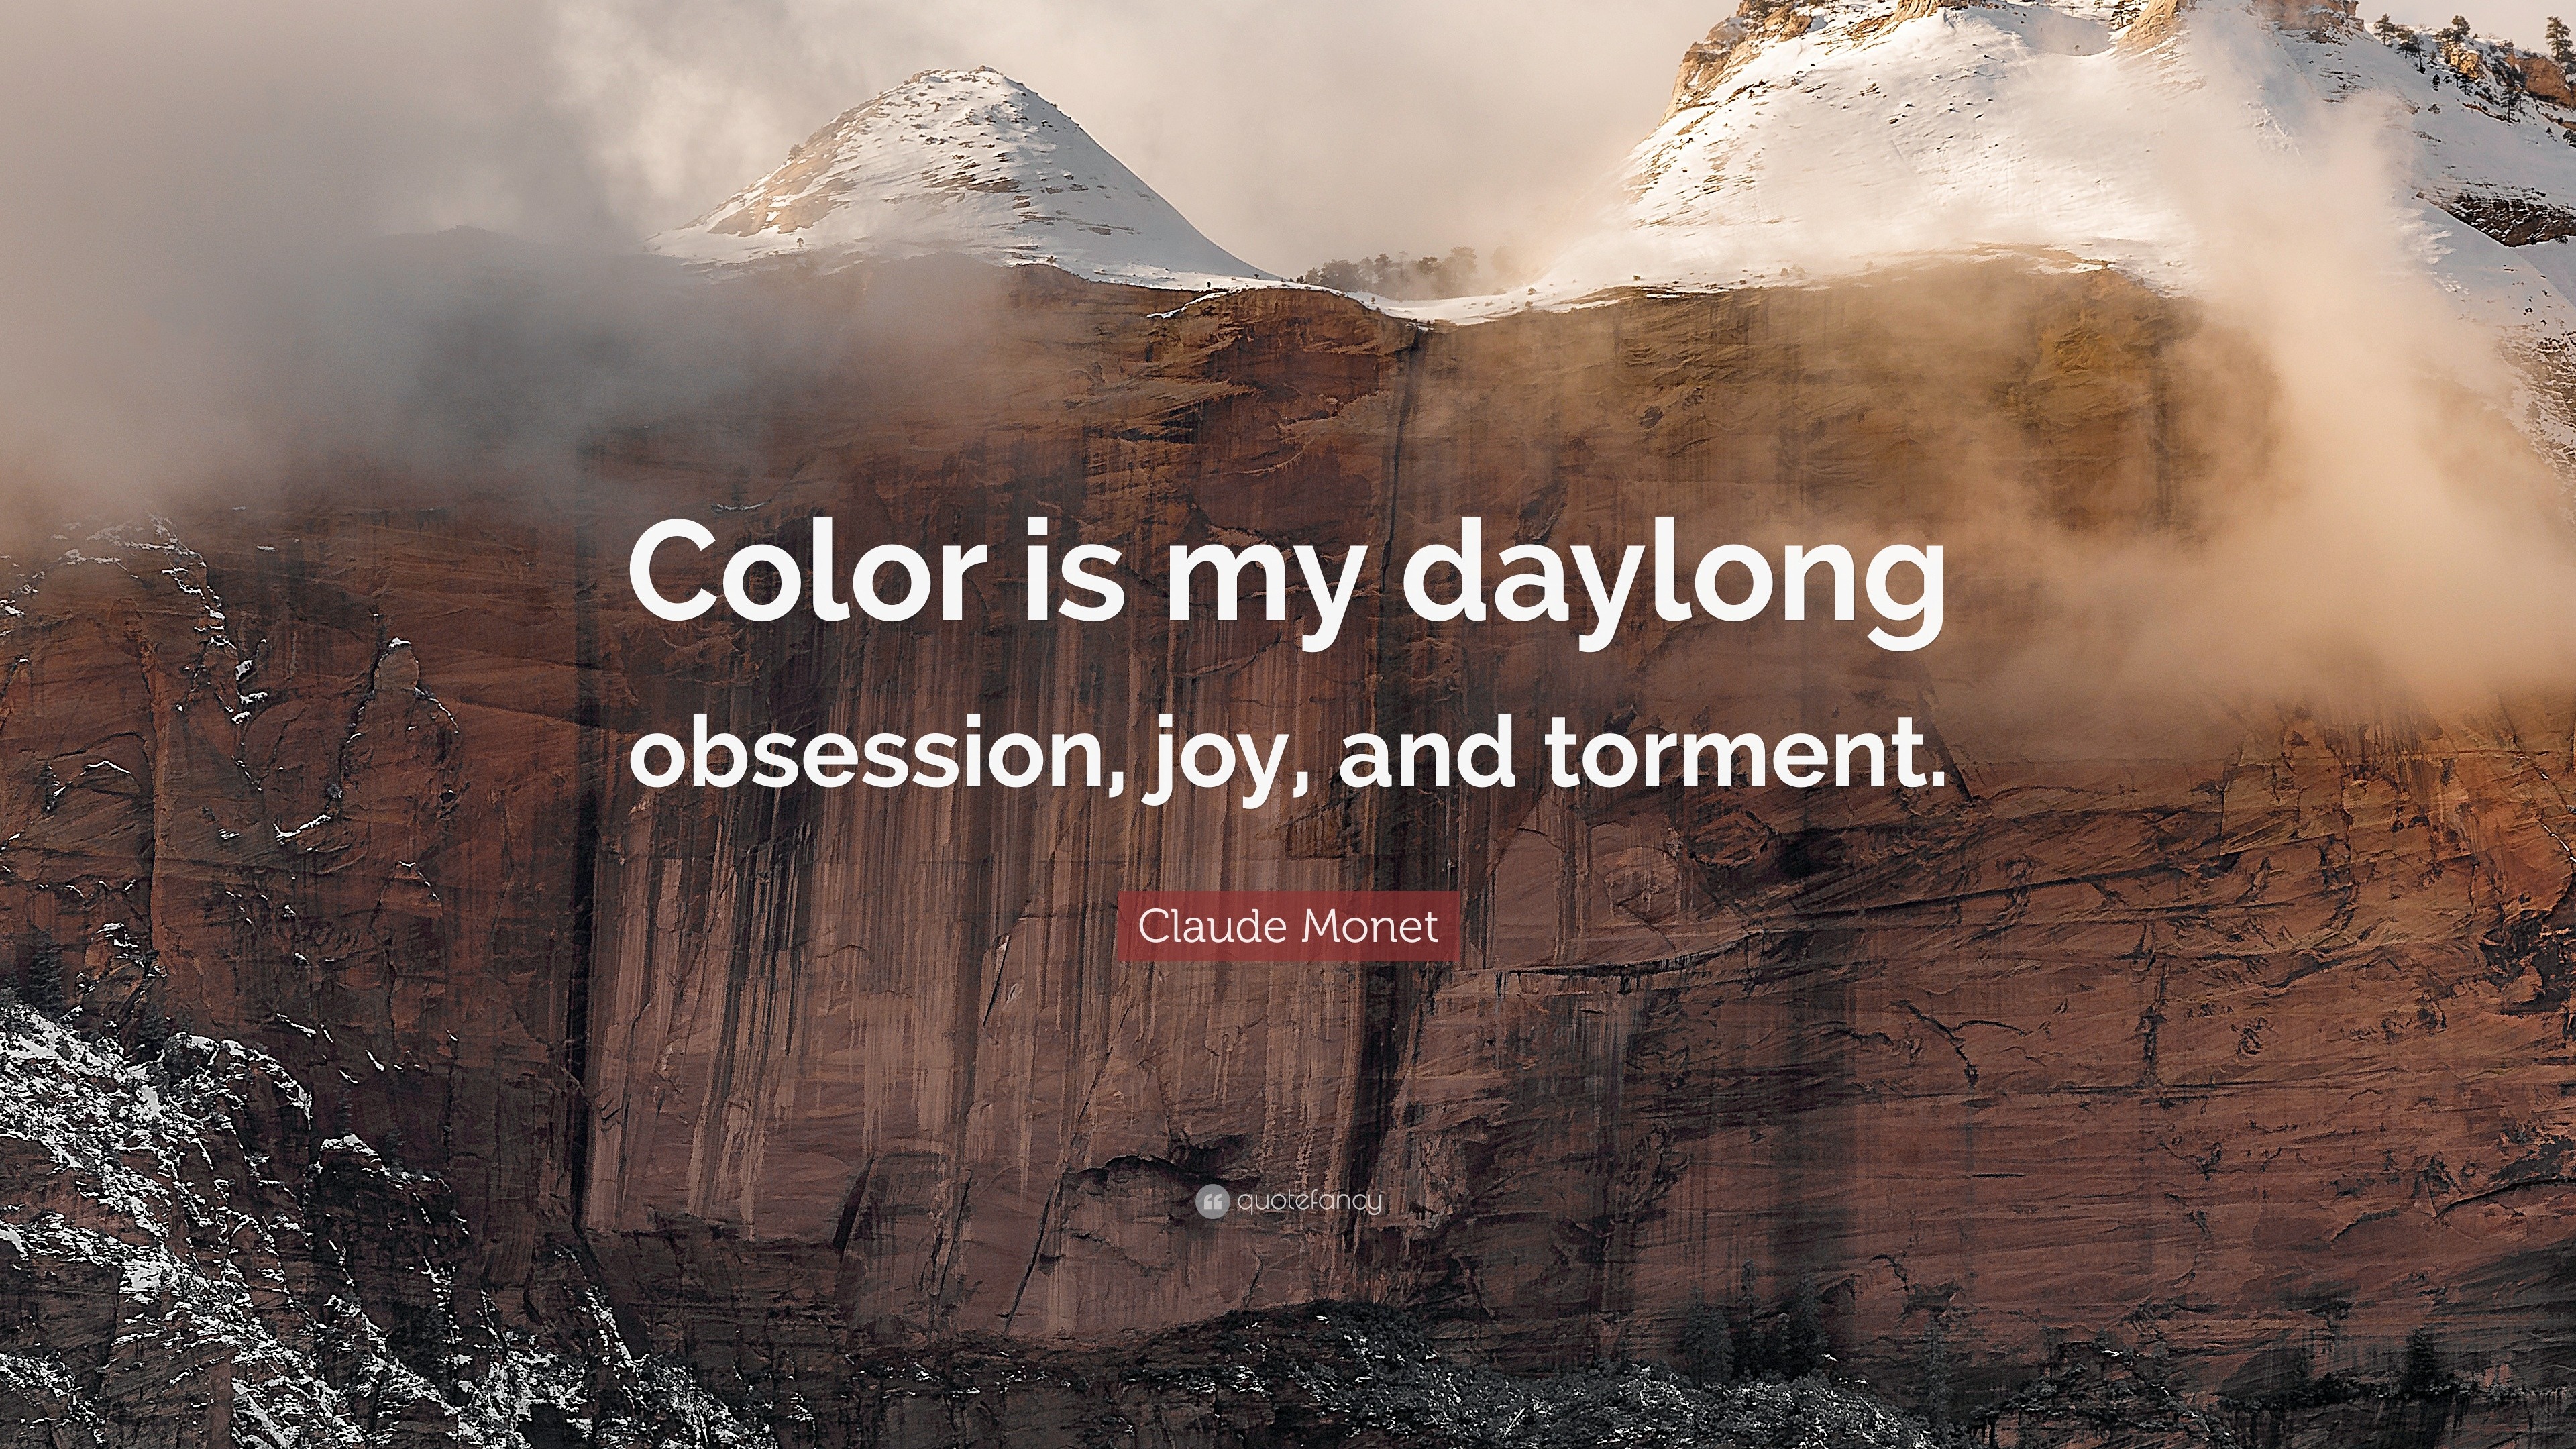 Claude Monet Quote: “Color is my daylong obsession, joy, and torment.”